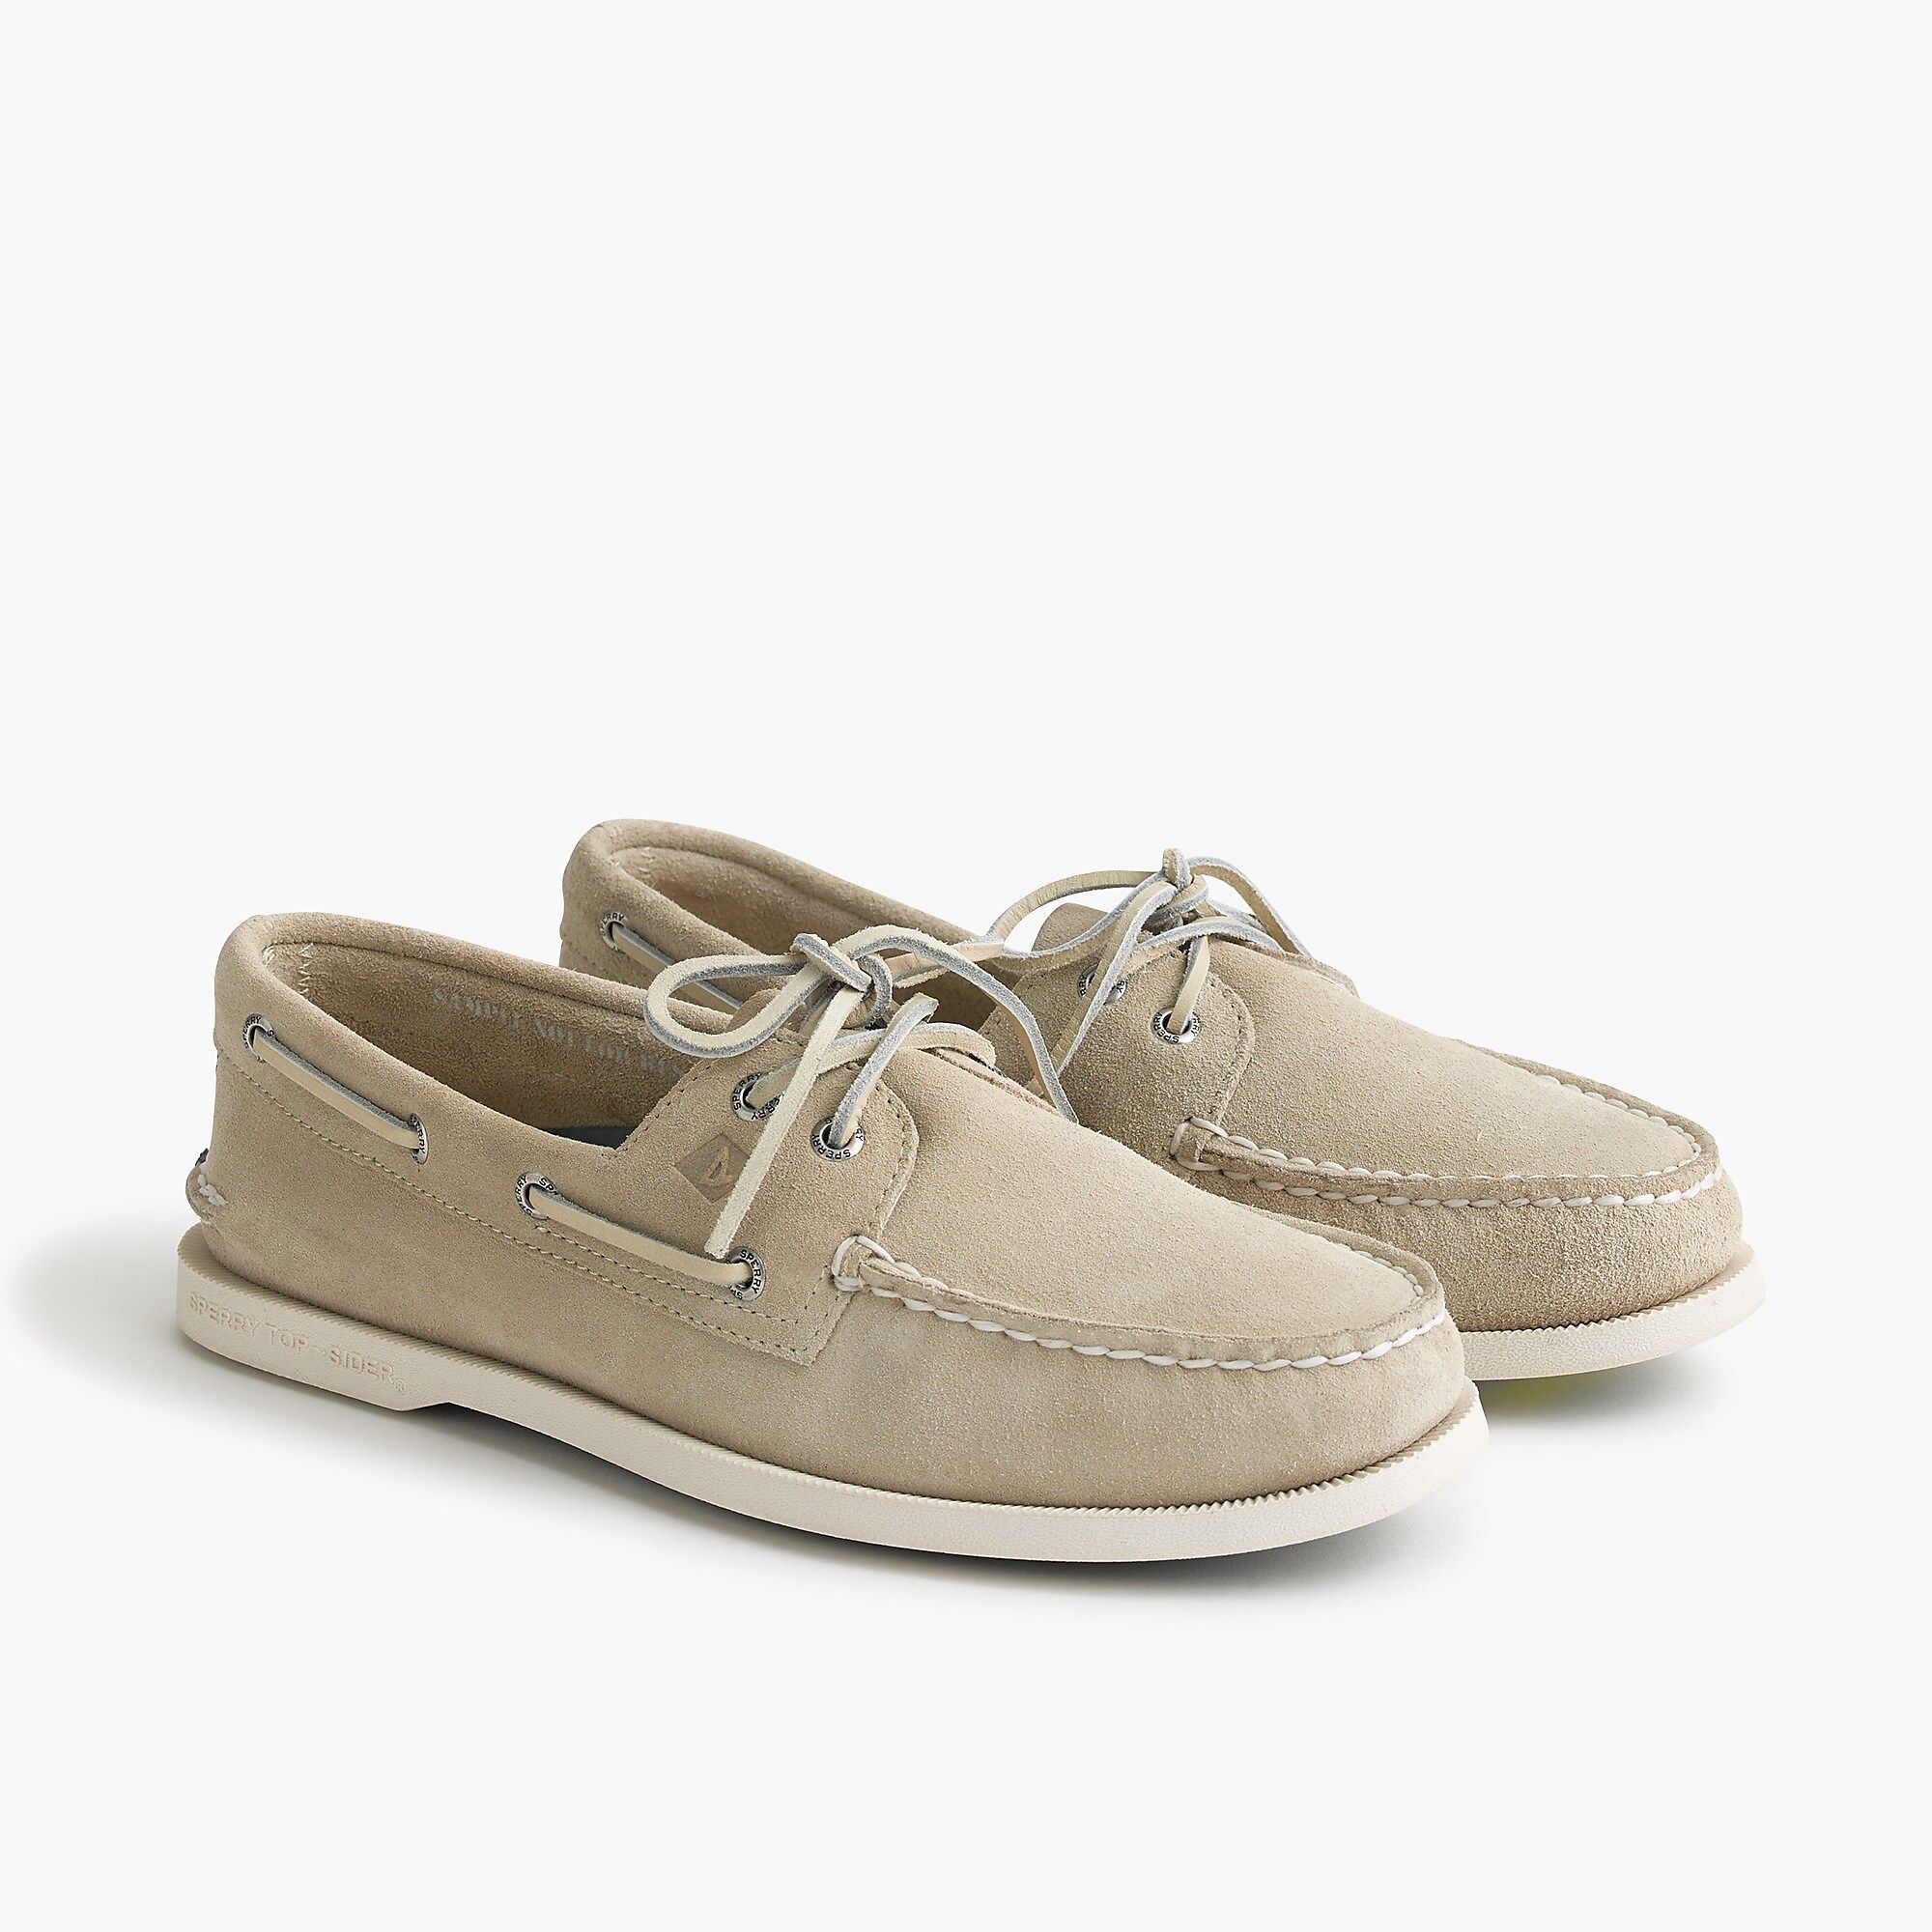 Sperry® Top-sider boat shoes in summer suede | J.Crew US